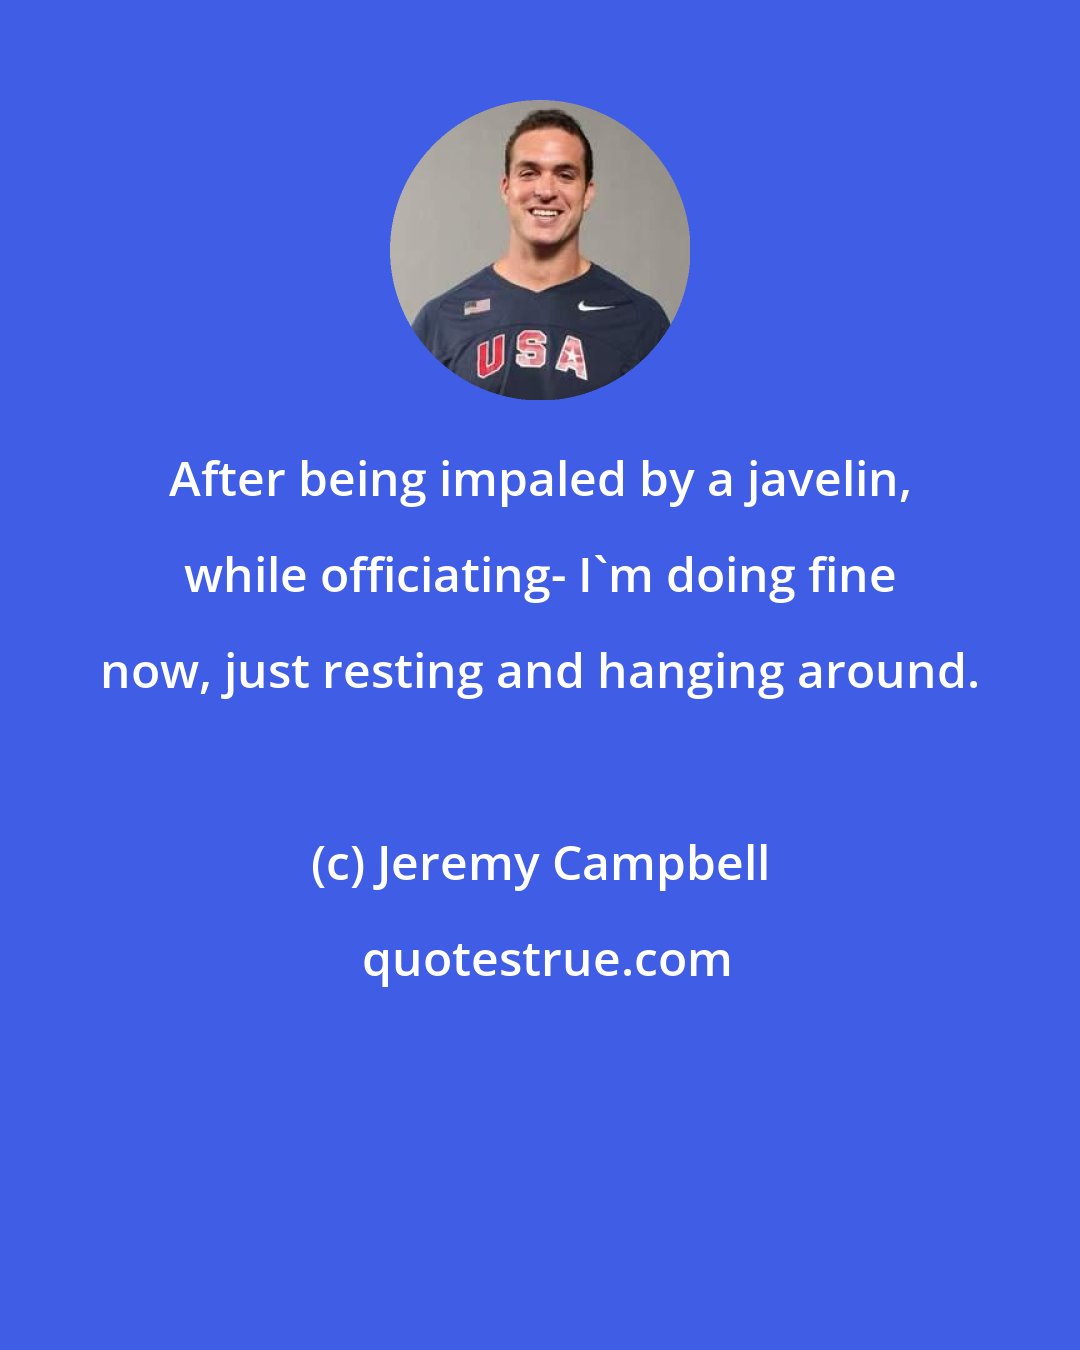 Jeremy Campbell: After being impaled by a javelin, while officiating- I'm doing fine now, just resting and hanging around.